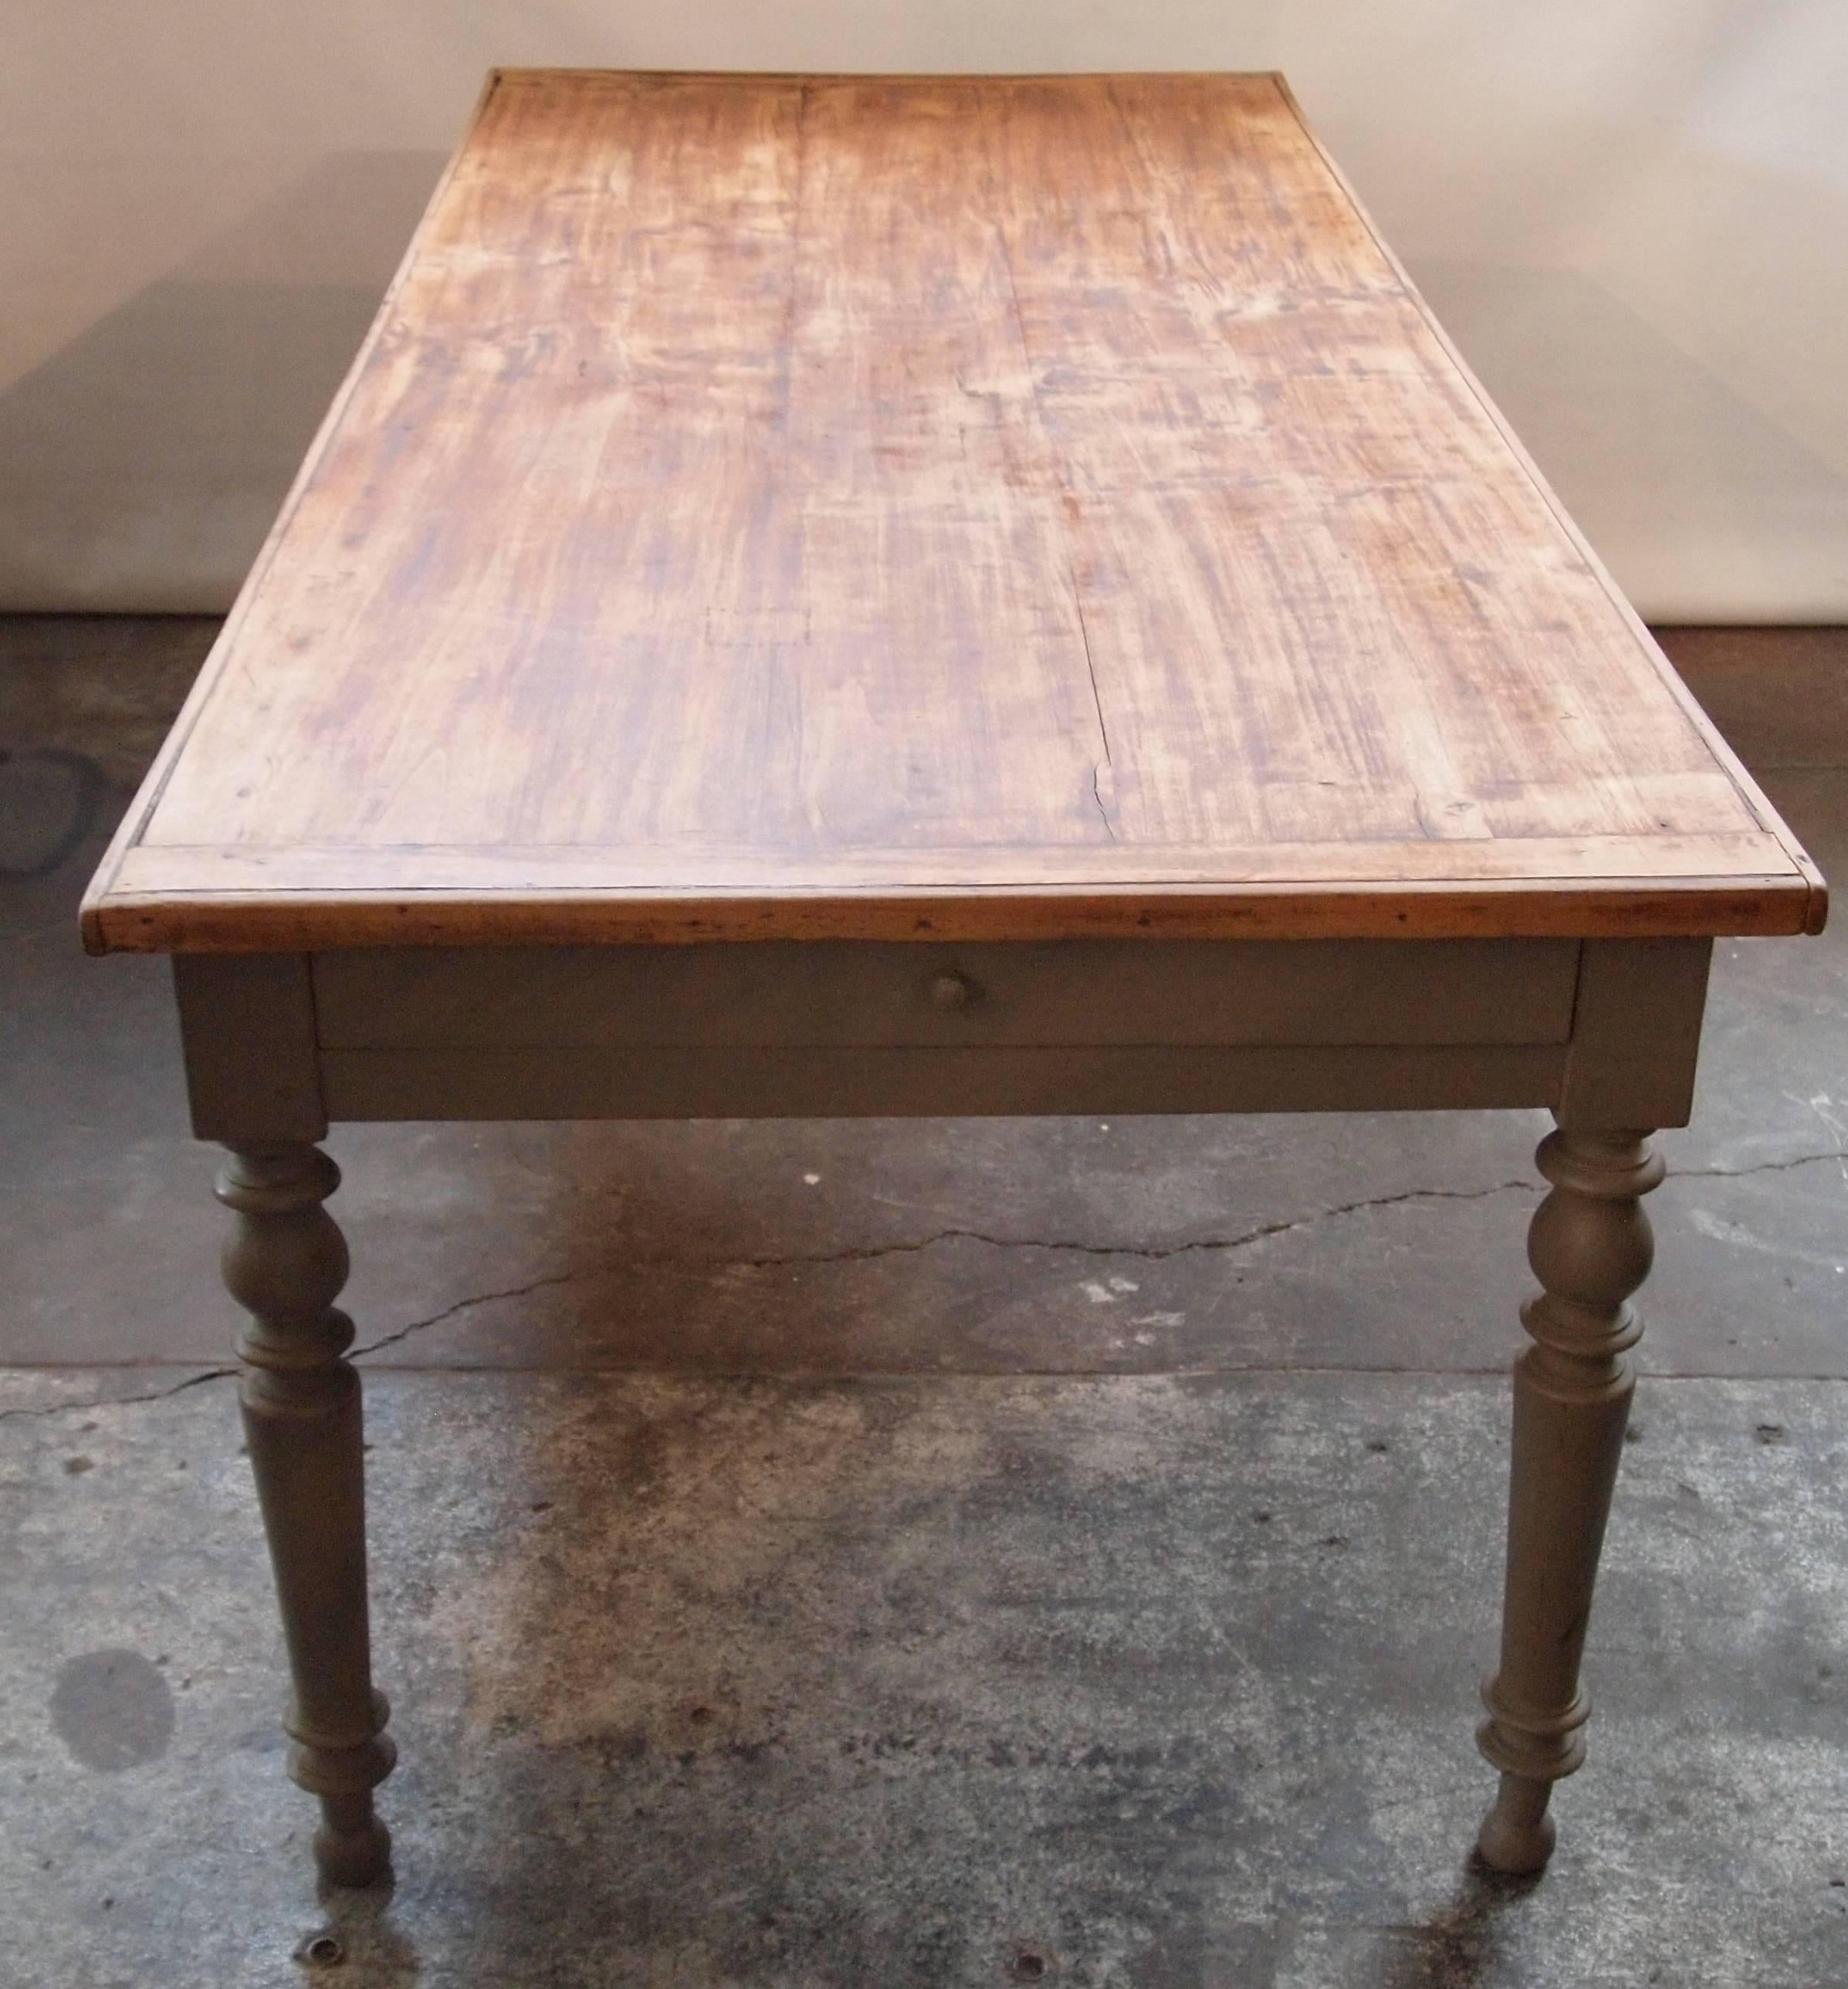 Provincial French farm table with a stained pine wood top on a grey painted base with turned legs. One drawer and one slide at each end.